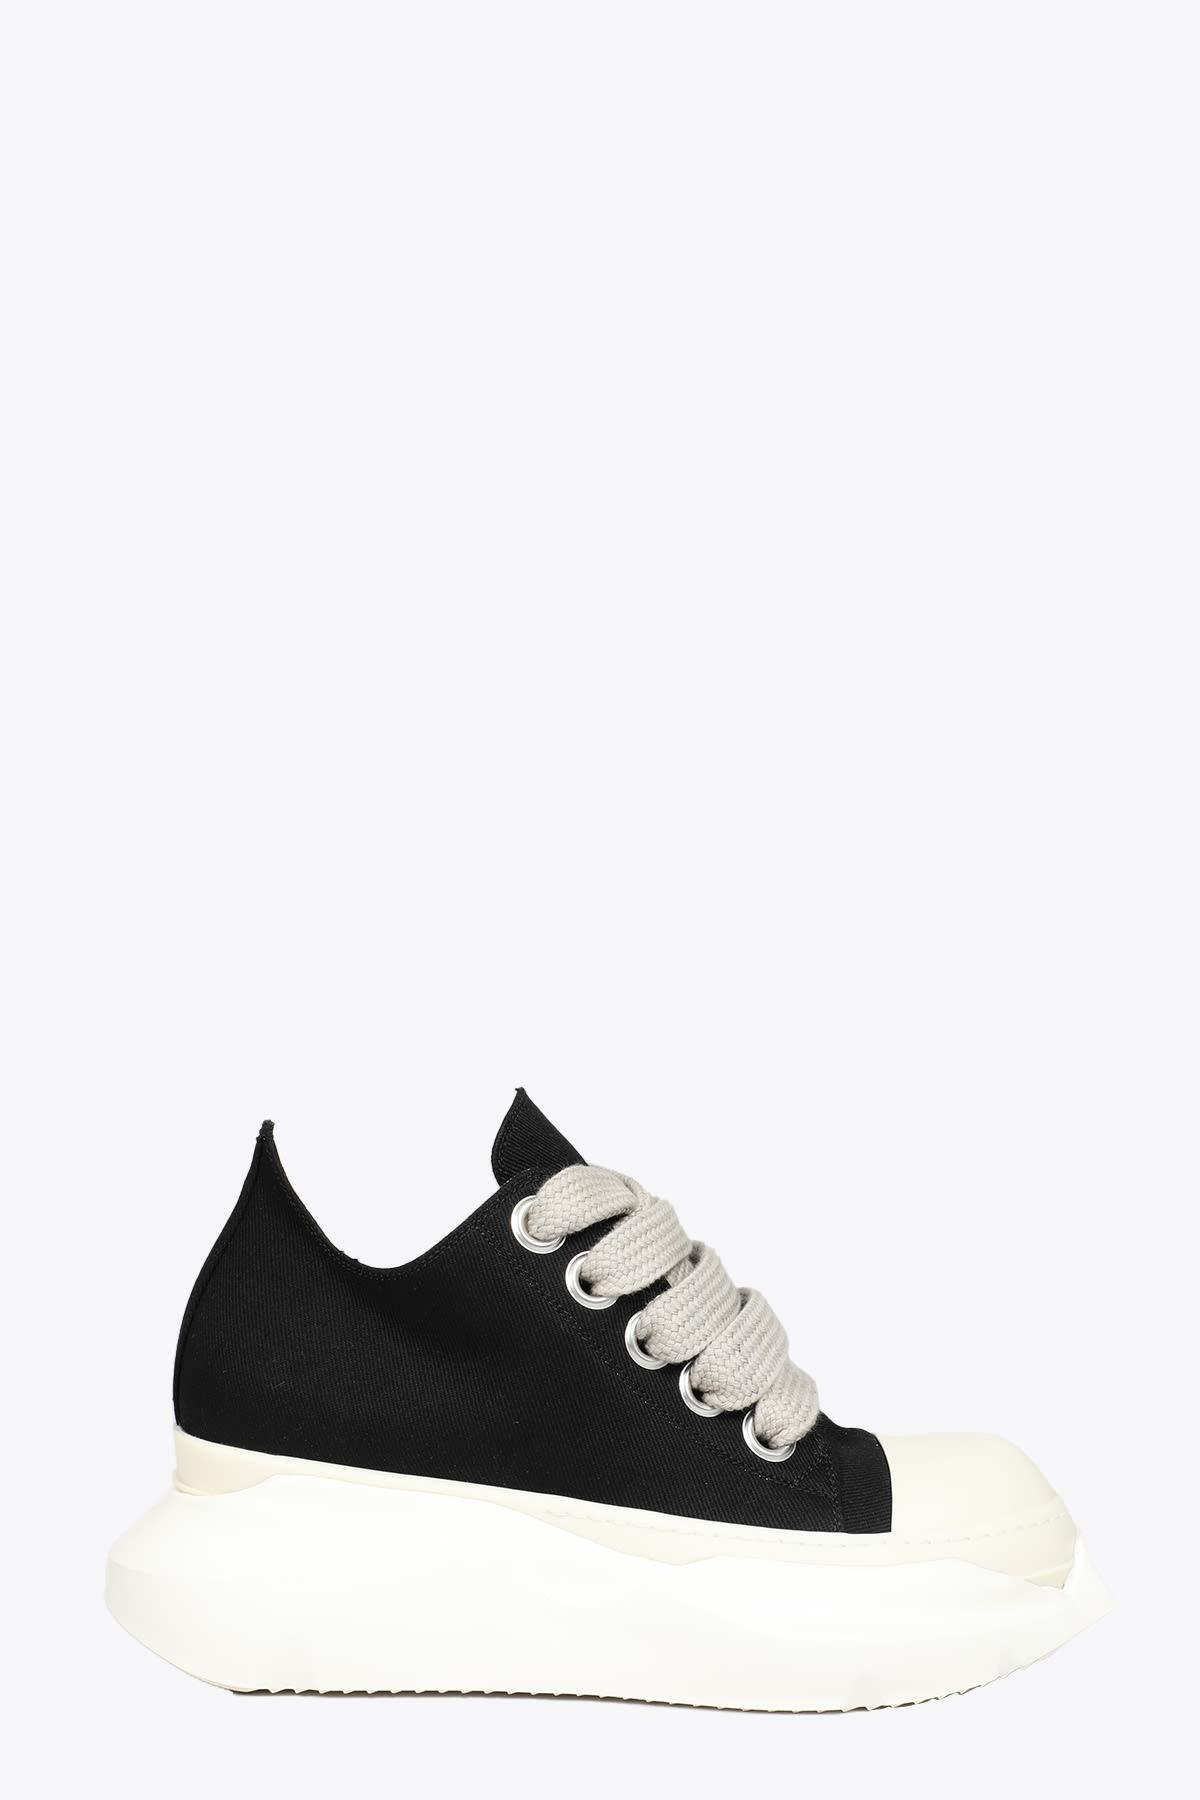 Rick Owens DRKSHDW Abstract Low Black Denim Low Abstract Sneaker 